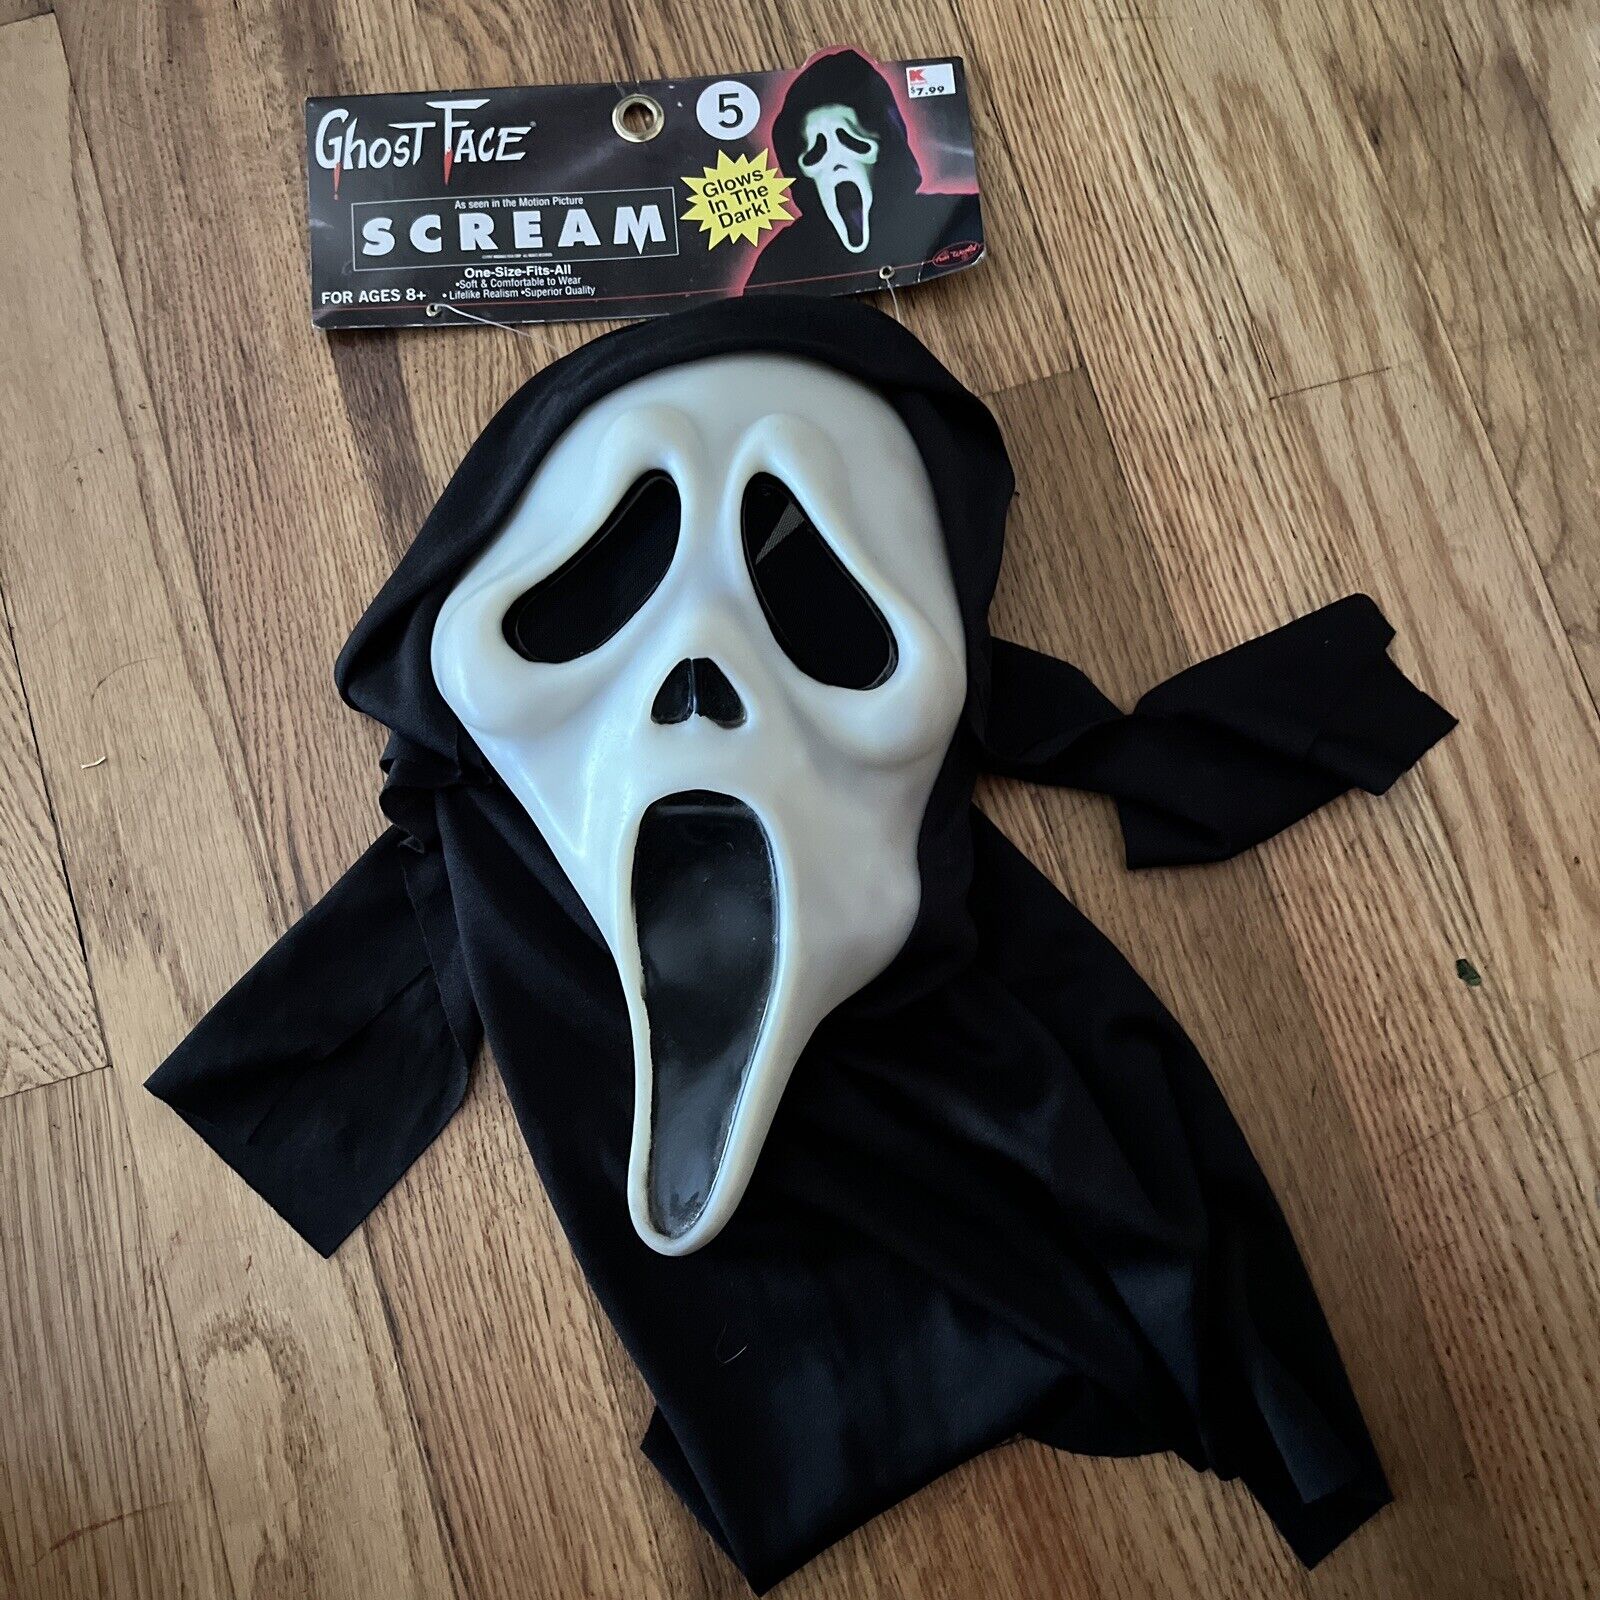 Easter Unlimited Fun World Scream 5 Ghost Face Mask Glow In The Dark NWT